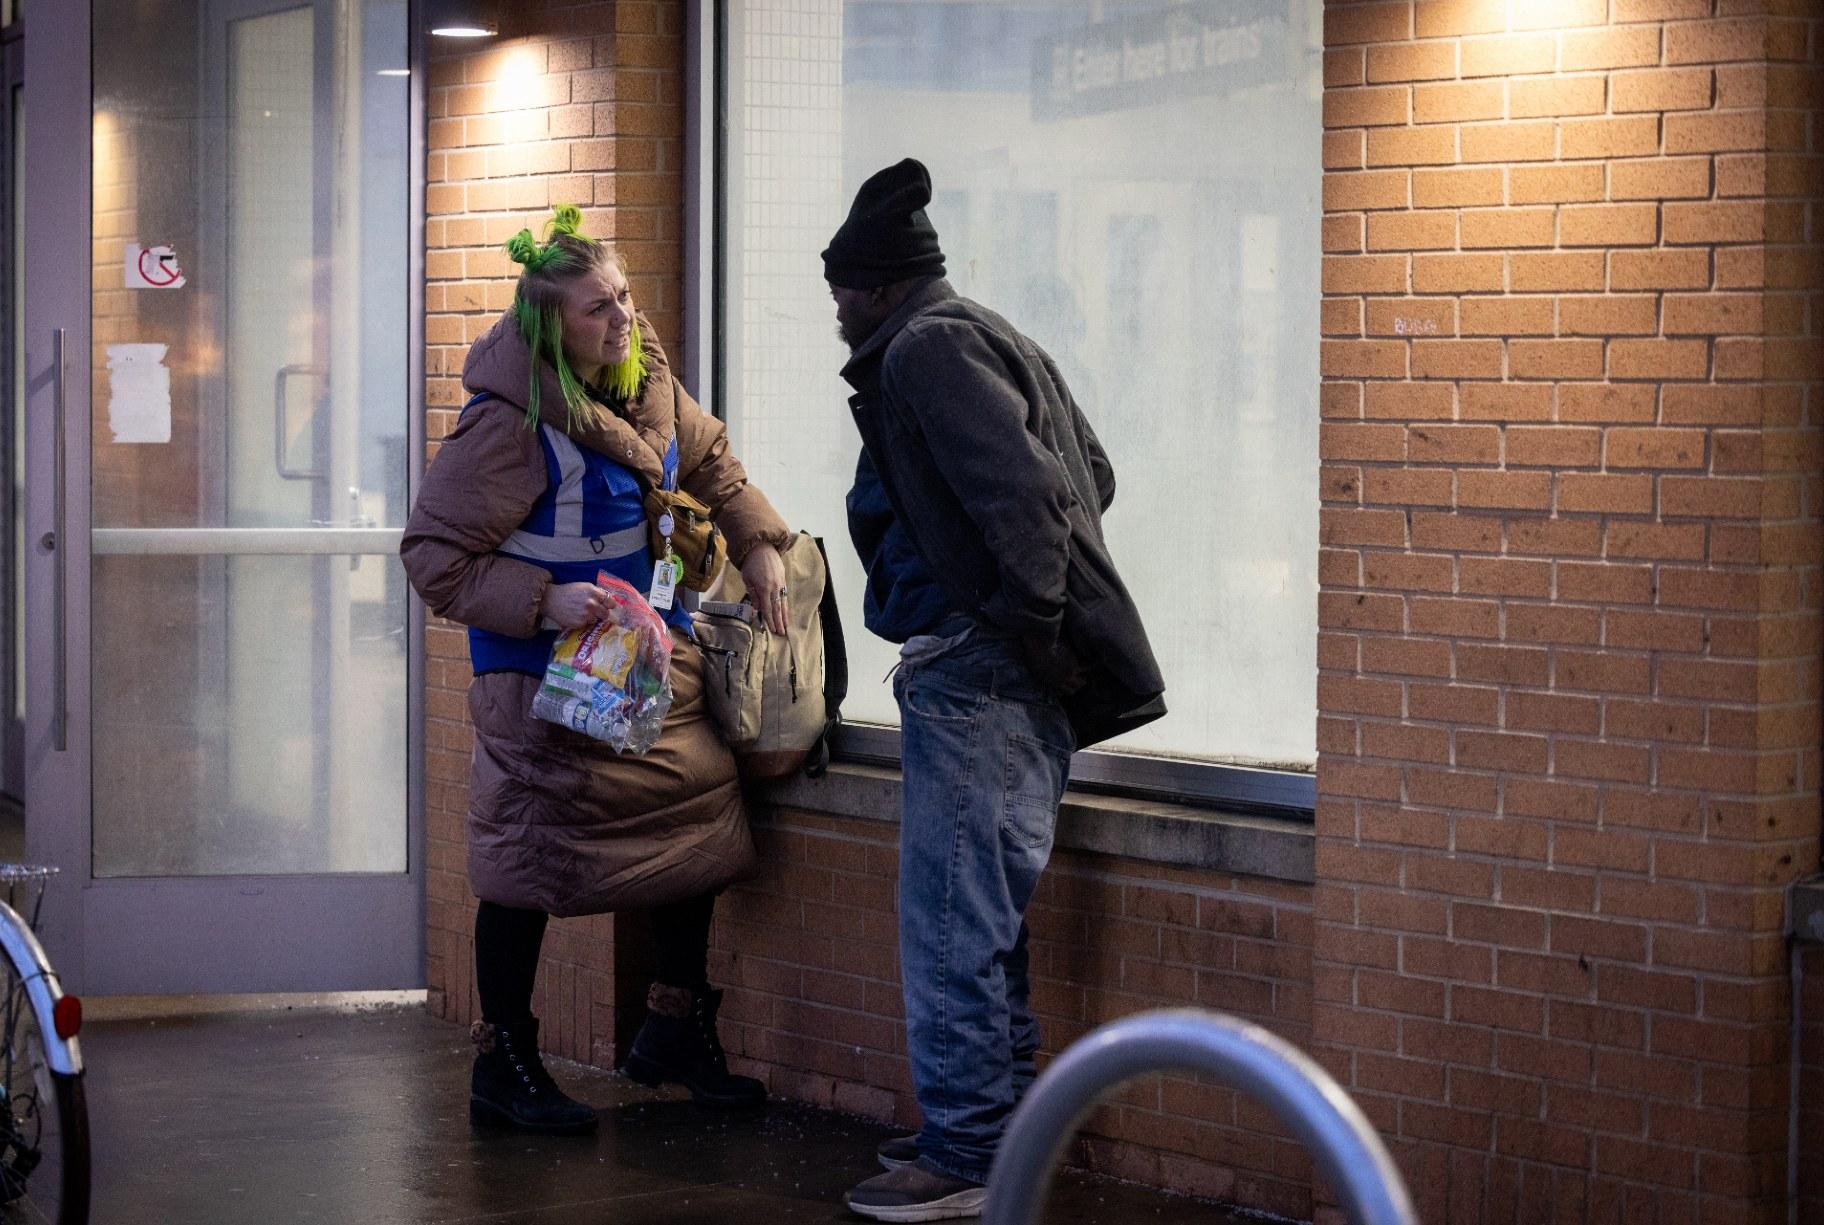 Caseworker Ell Fabricius talks to a person at the North/Clybourn Red Line stop about shelter options. (Kathleen Hinkel / Block Club Chicago)